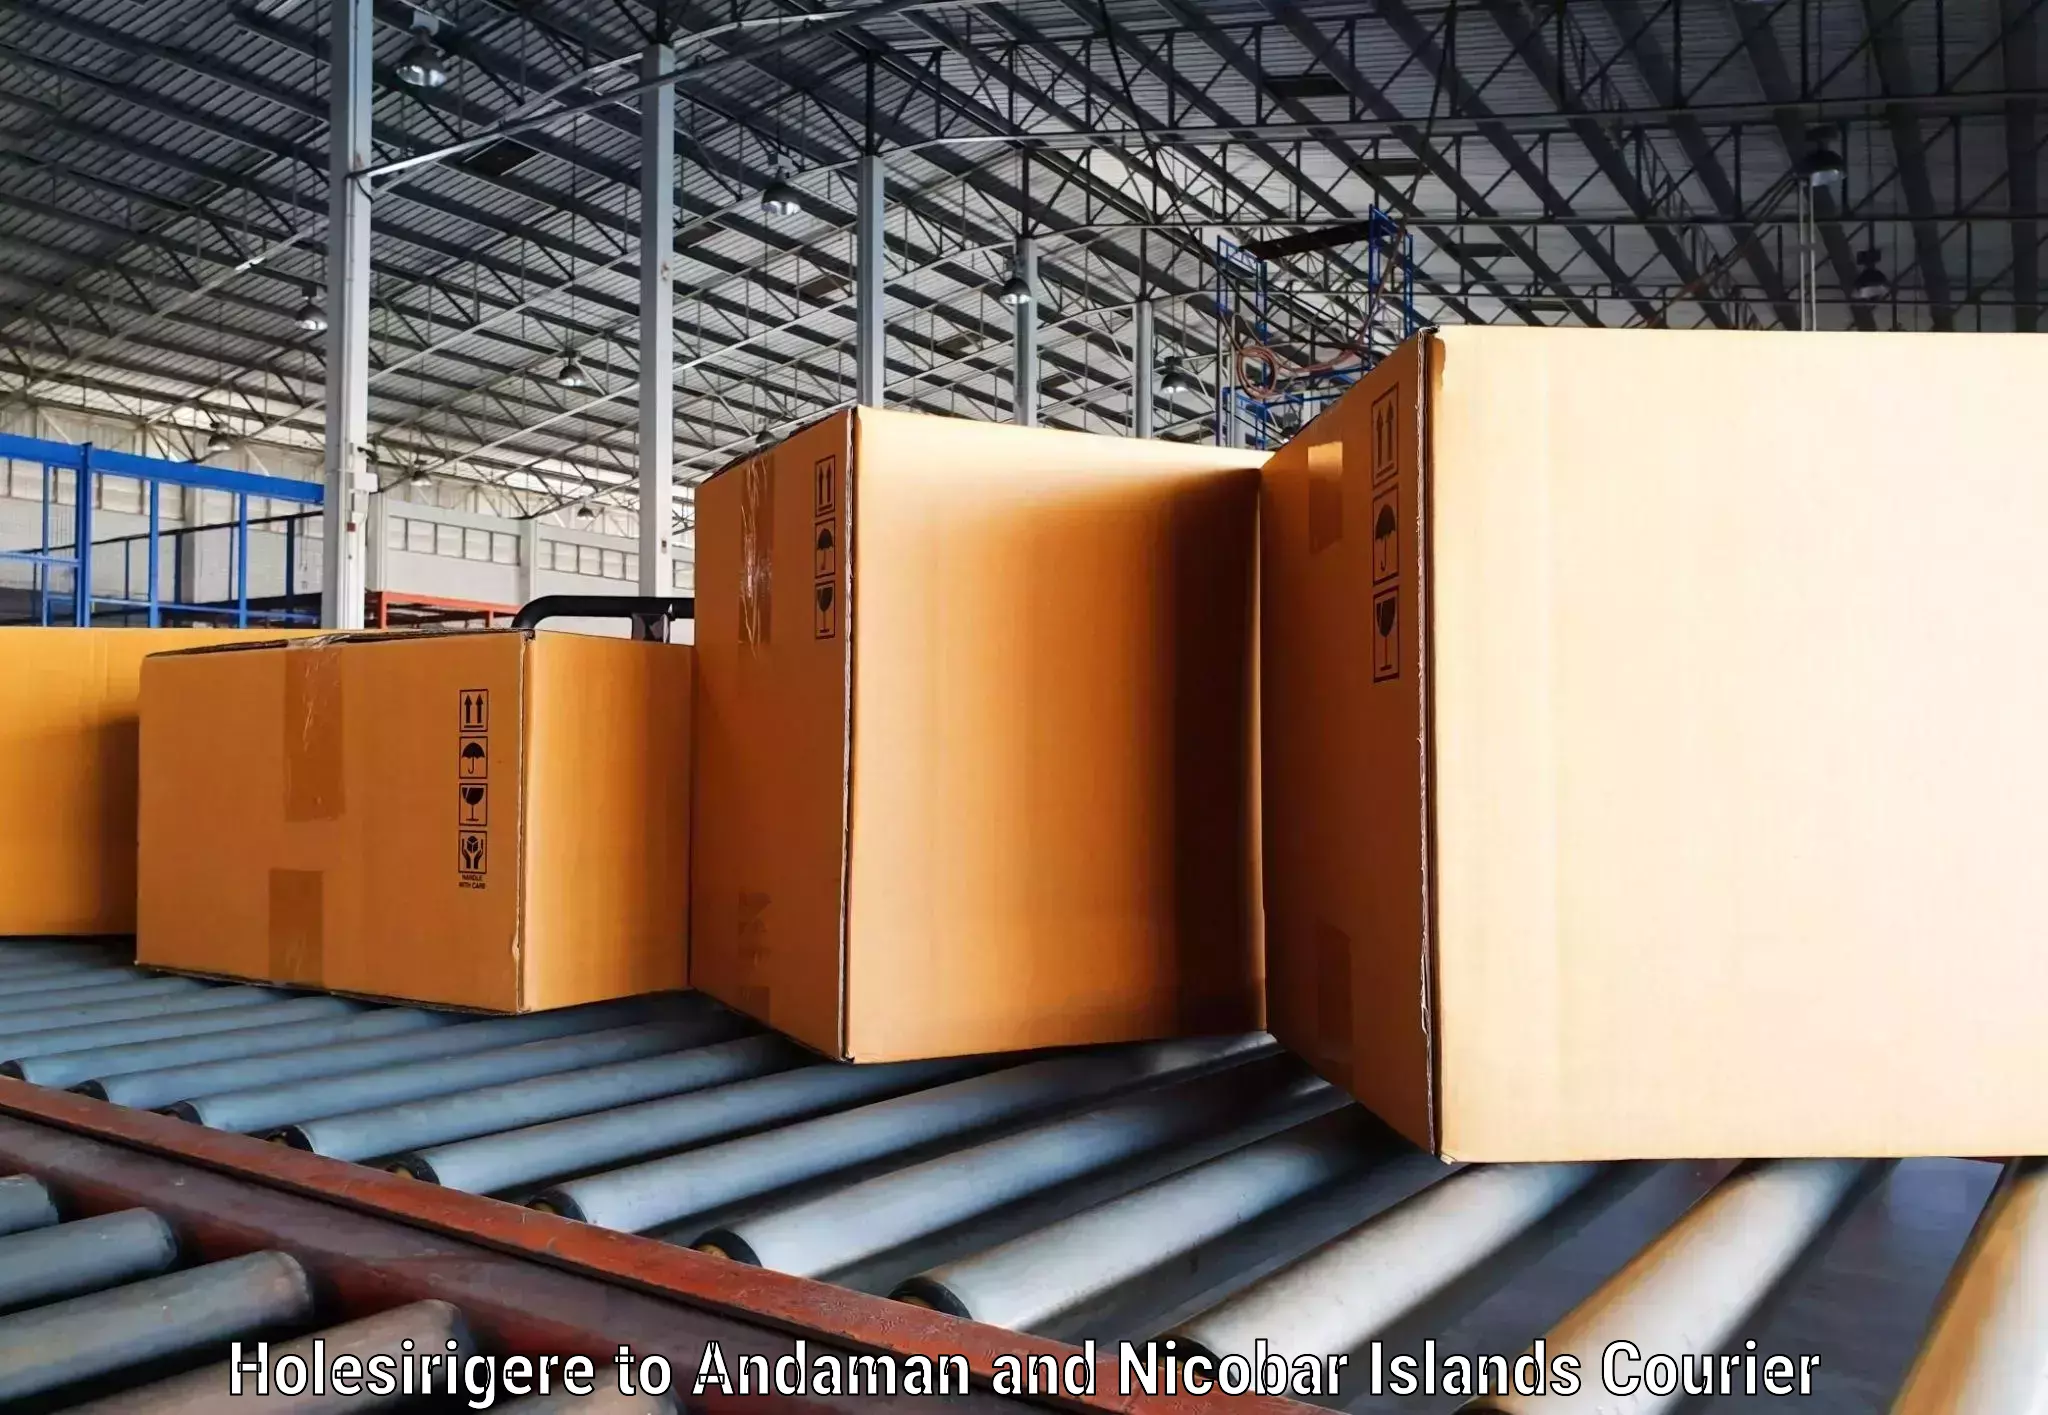 Efficient shipping platforms in Holesirigere to Andaman and Nicobar Islands